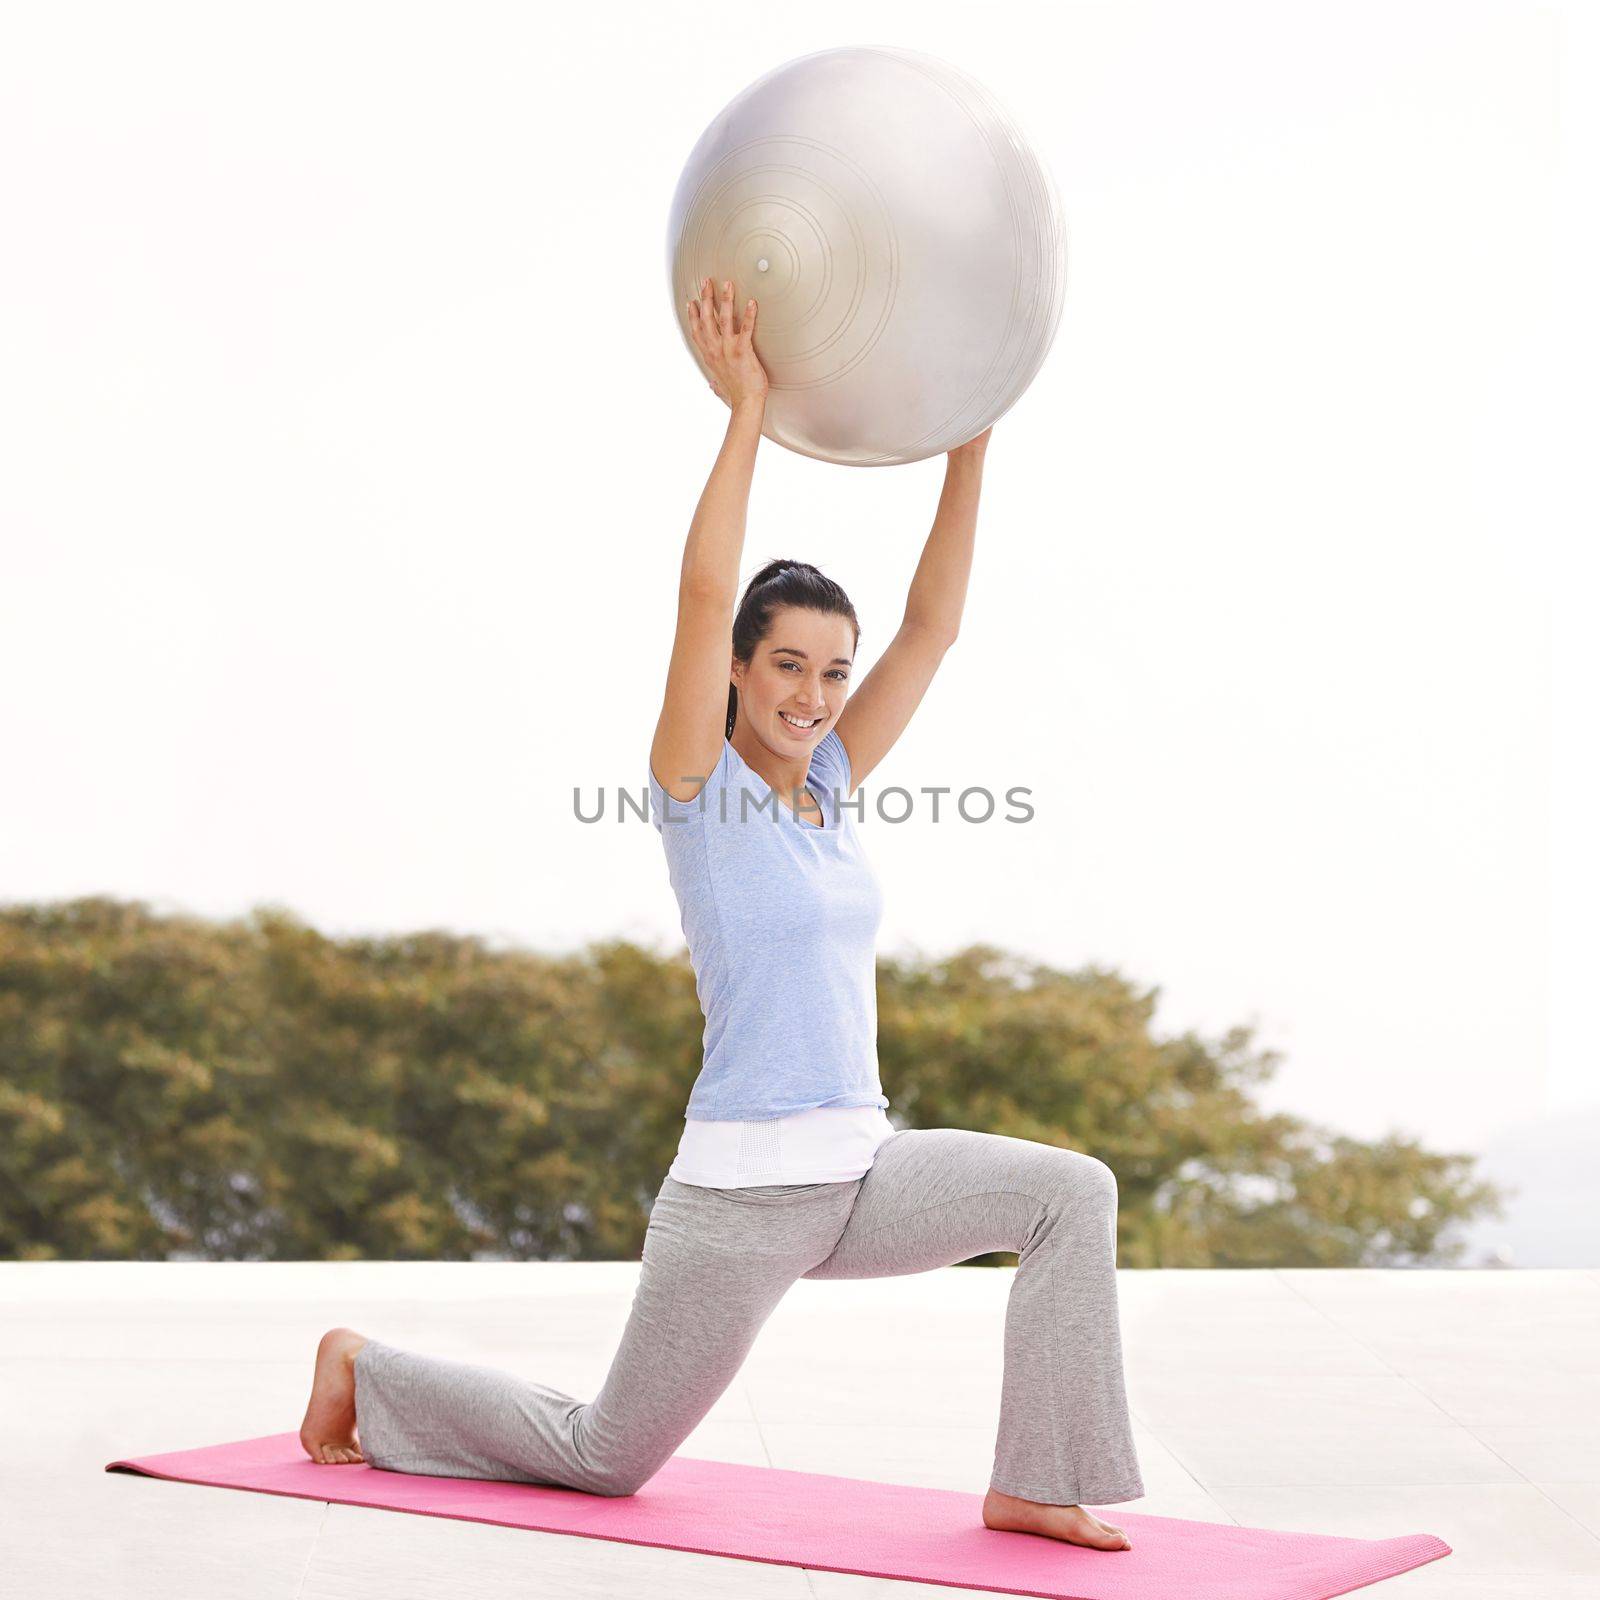 Your health is your greatest gift. Full length portrait of a young woman doing yoga outdoors